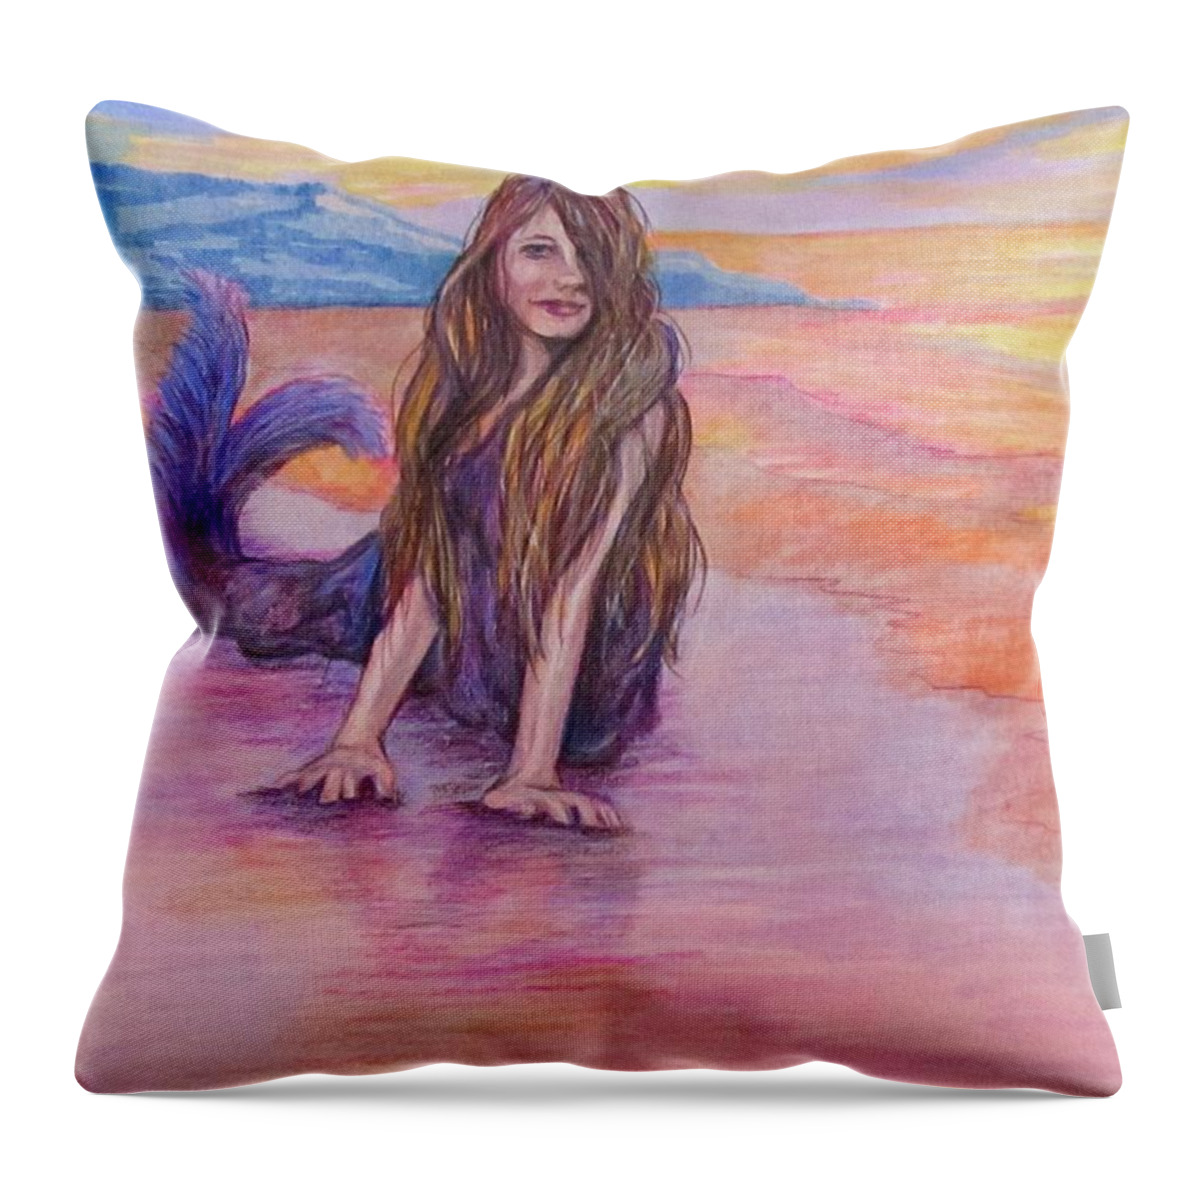 Mythology Throw Pillow featuring the painting Selkie by Barbara O'Toole